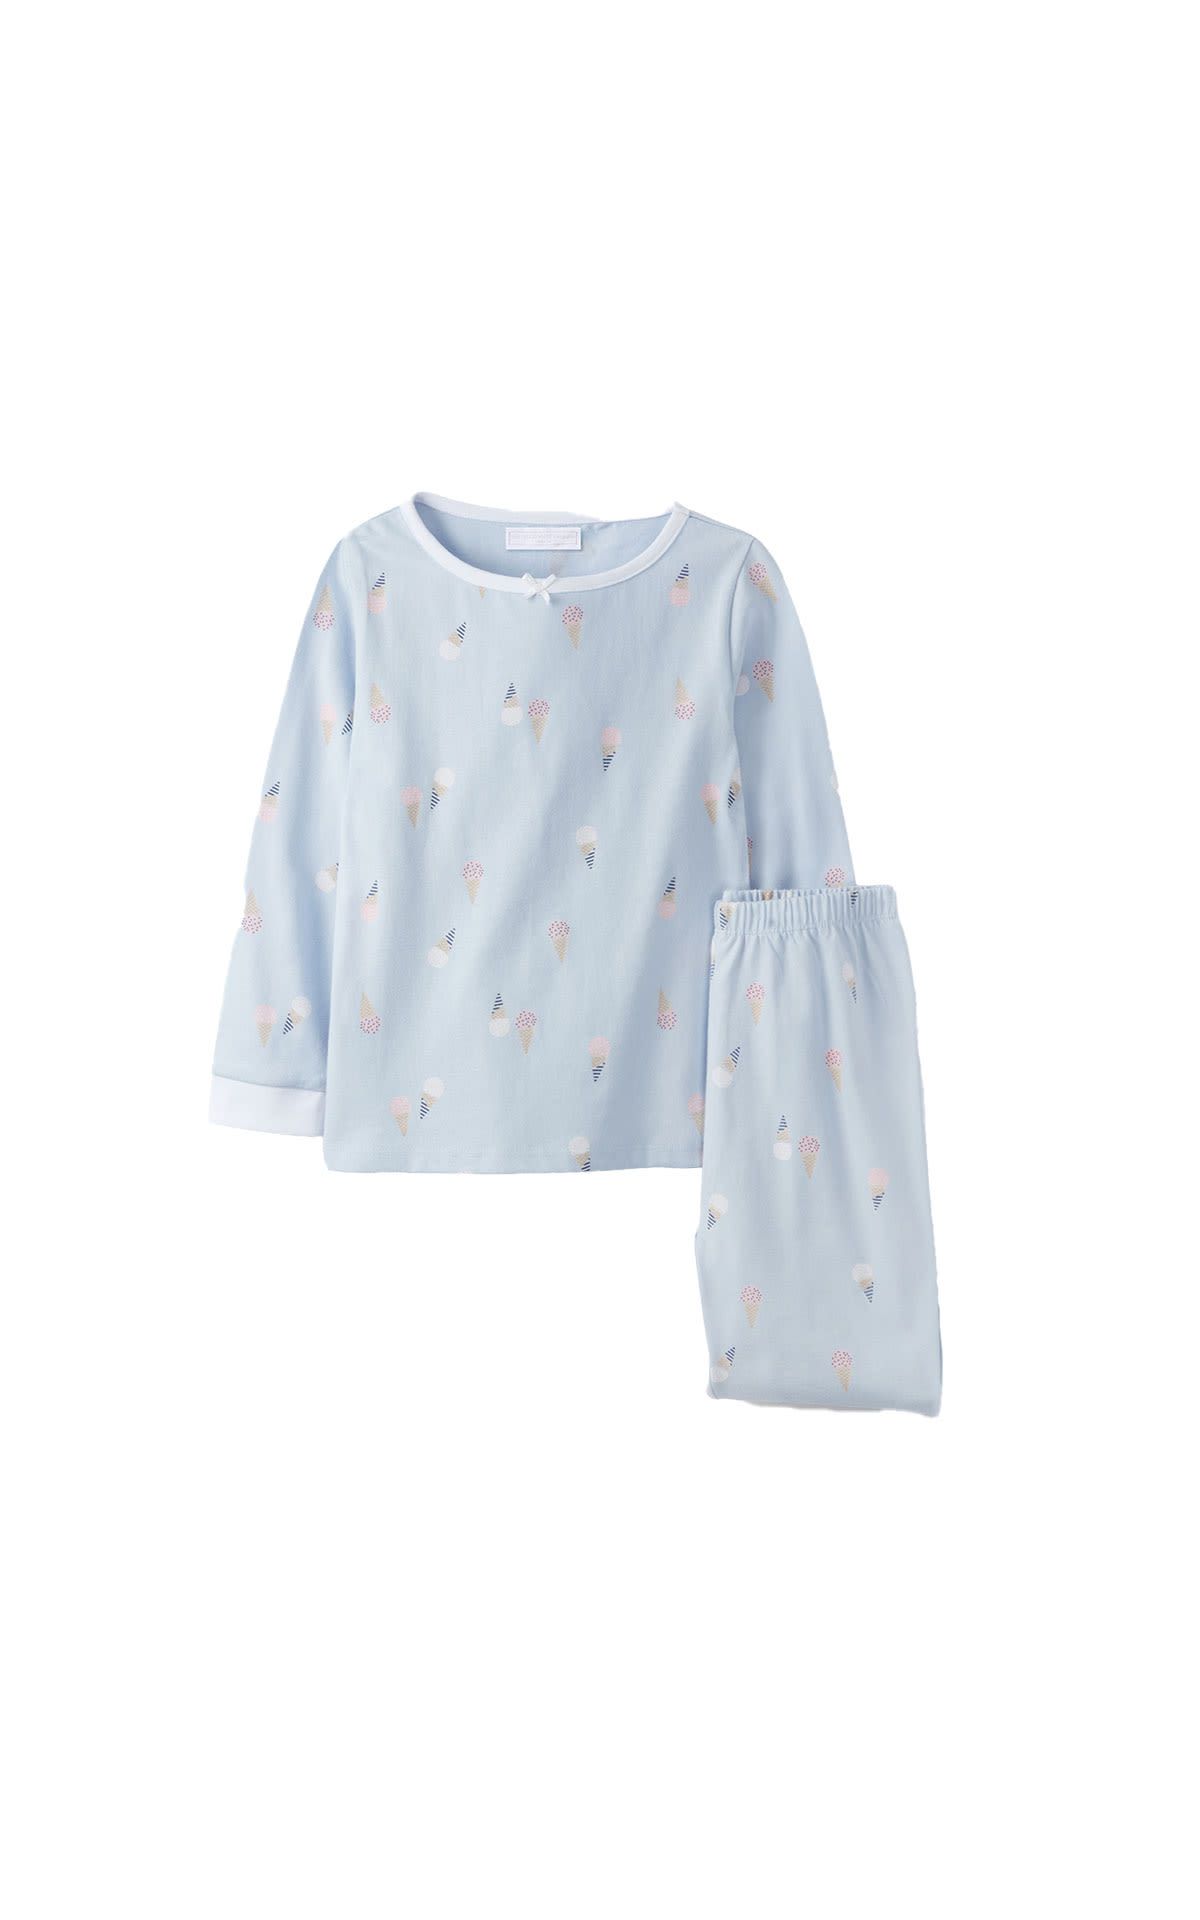 The White Company The Little White Company ice cream print pyjamas from Bicester Village